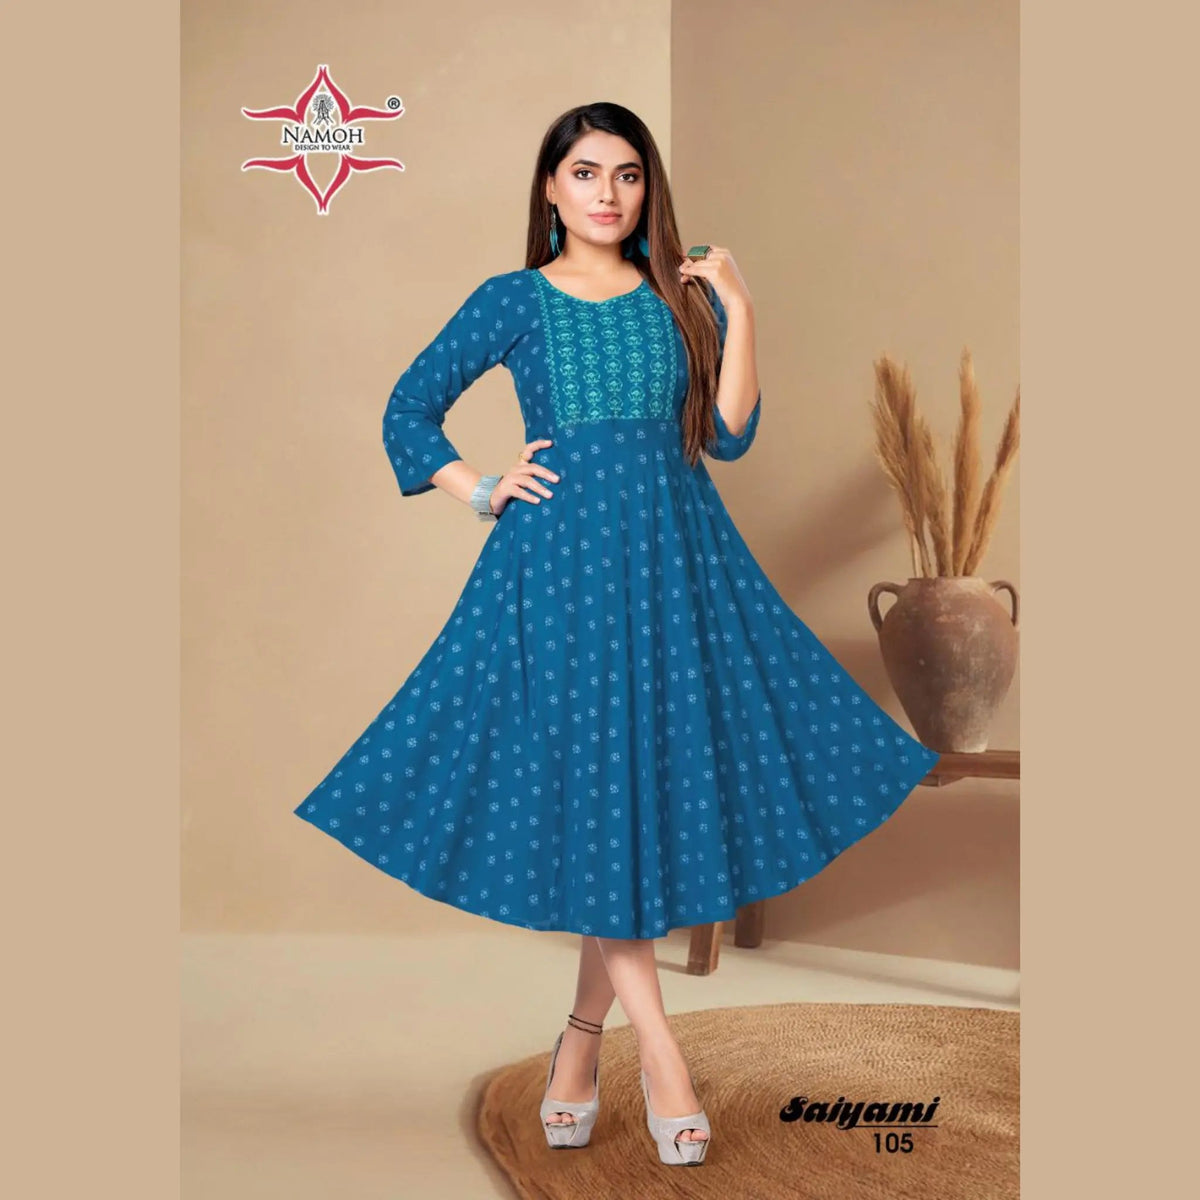 Cerulean Blue Fancy Rayon Print Kurti with Embroidery